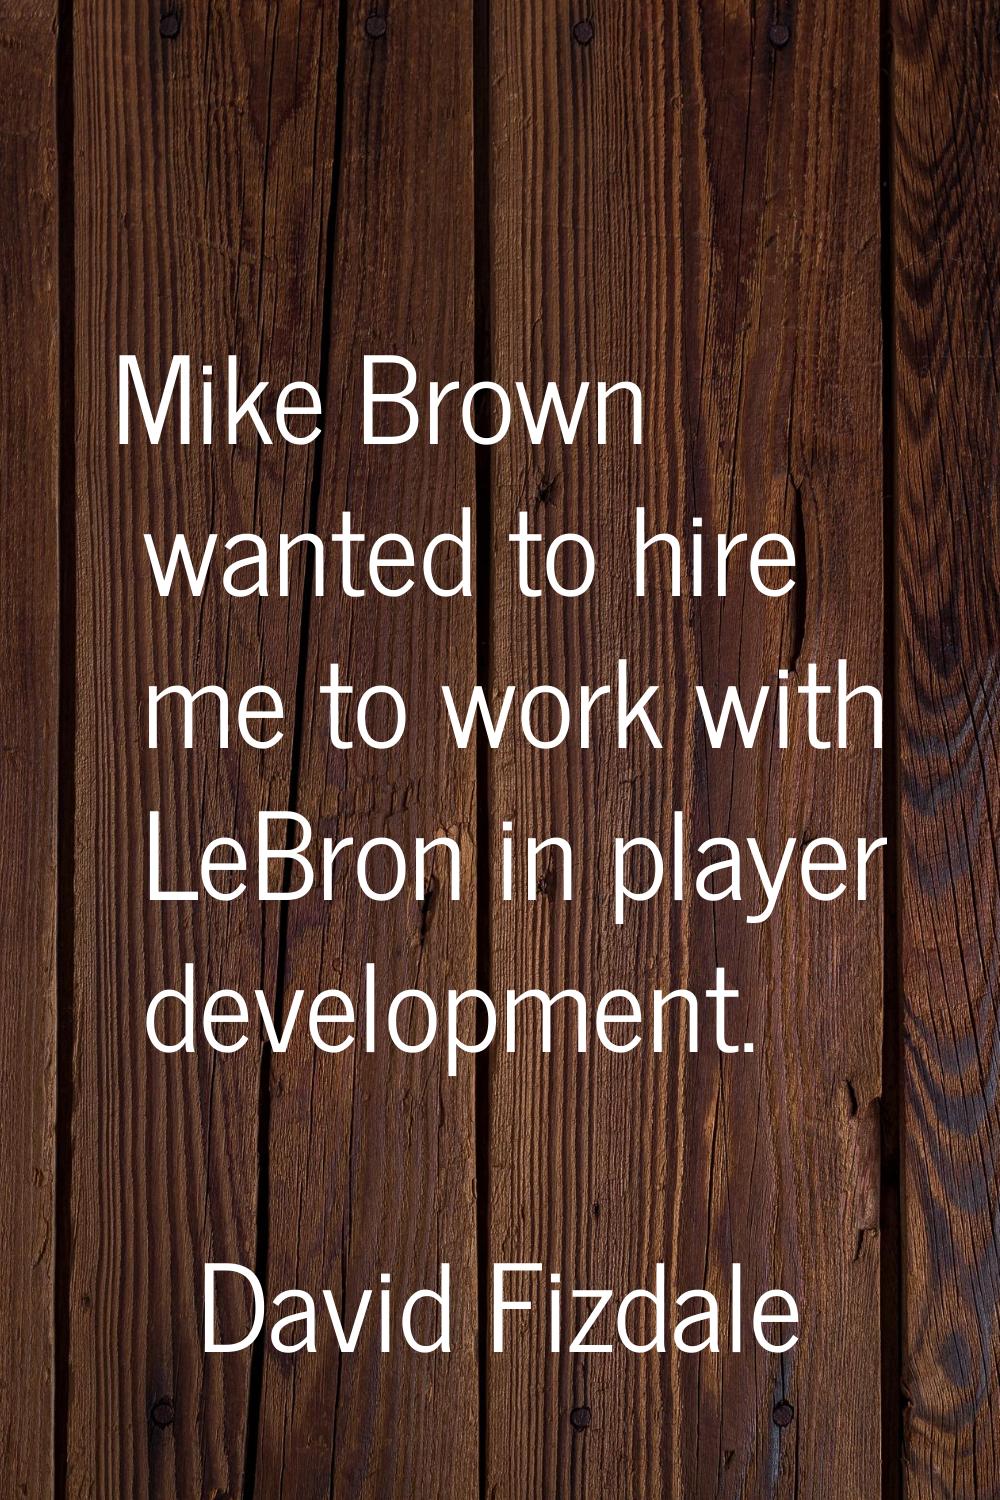 Mike Brown wanted to hire me to work with LeBron in player development.